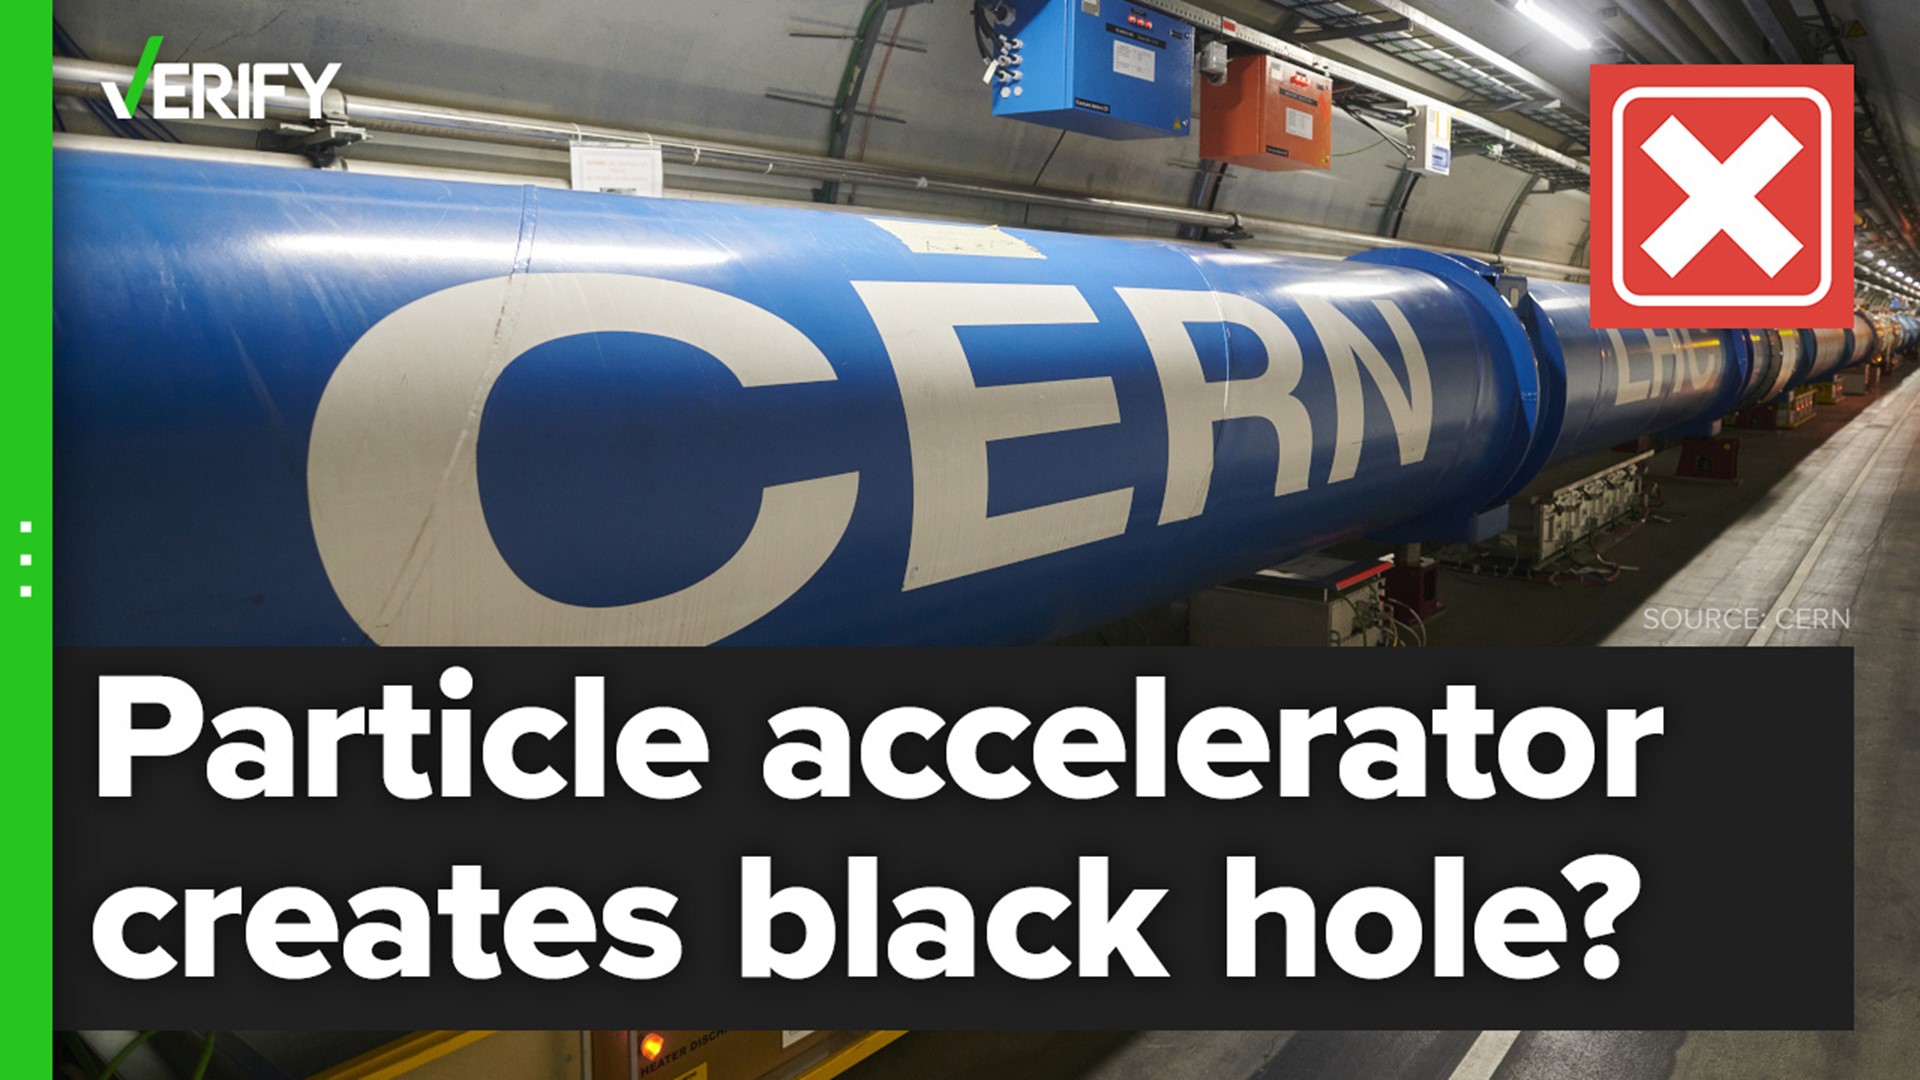 CERN’s particle accelerator July 5 event didn’t create a cosmic black hole. The machine also can’t shift time and space, like viral conspiracy theories claim.